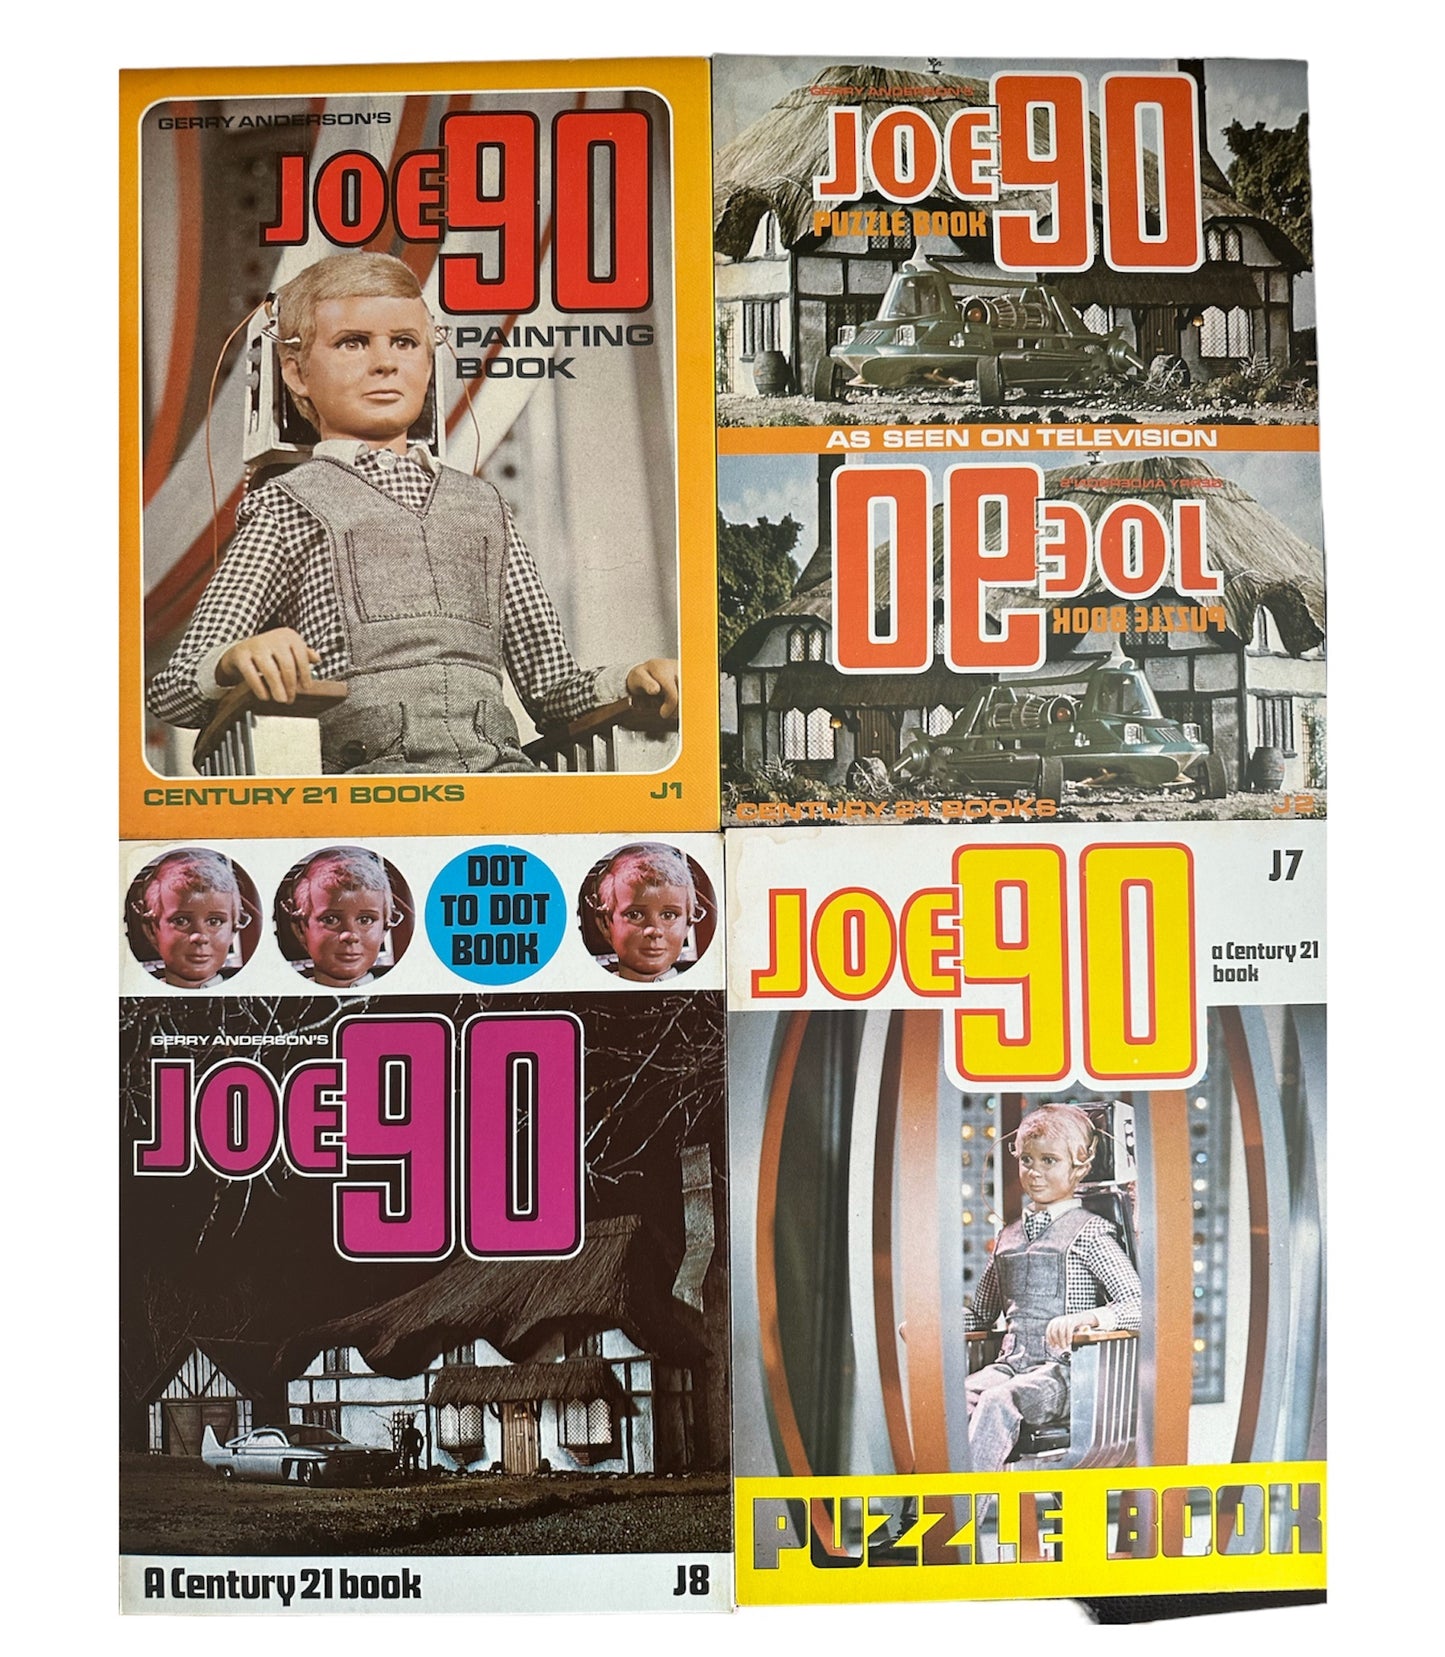 Vintage Gerry Andersons 1968 Ultra Rare Joe 90 Puzzle & Activity Book Set Pack Of 4 - As Seen In The TV Series - Century 21 Publishing - Shop Stock Room Find